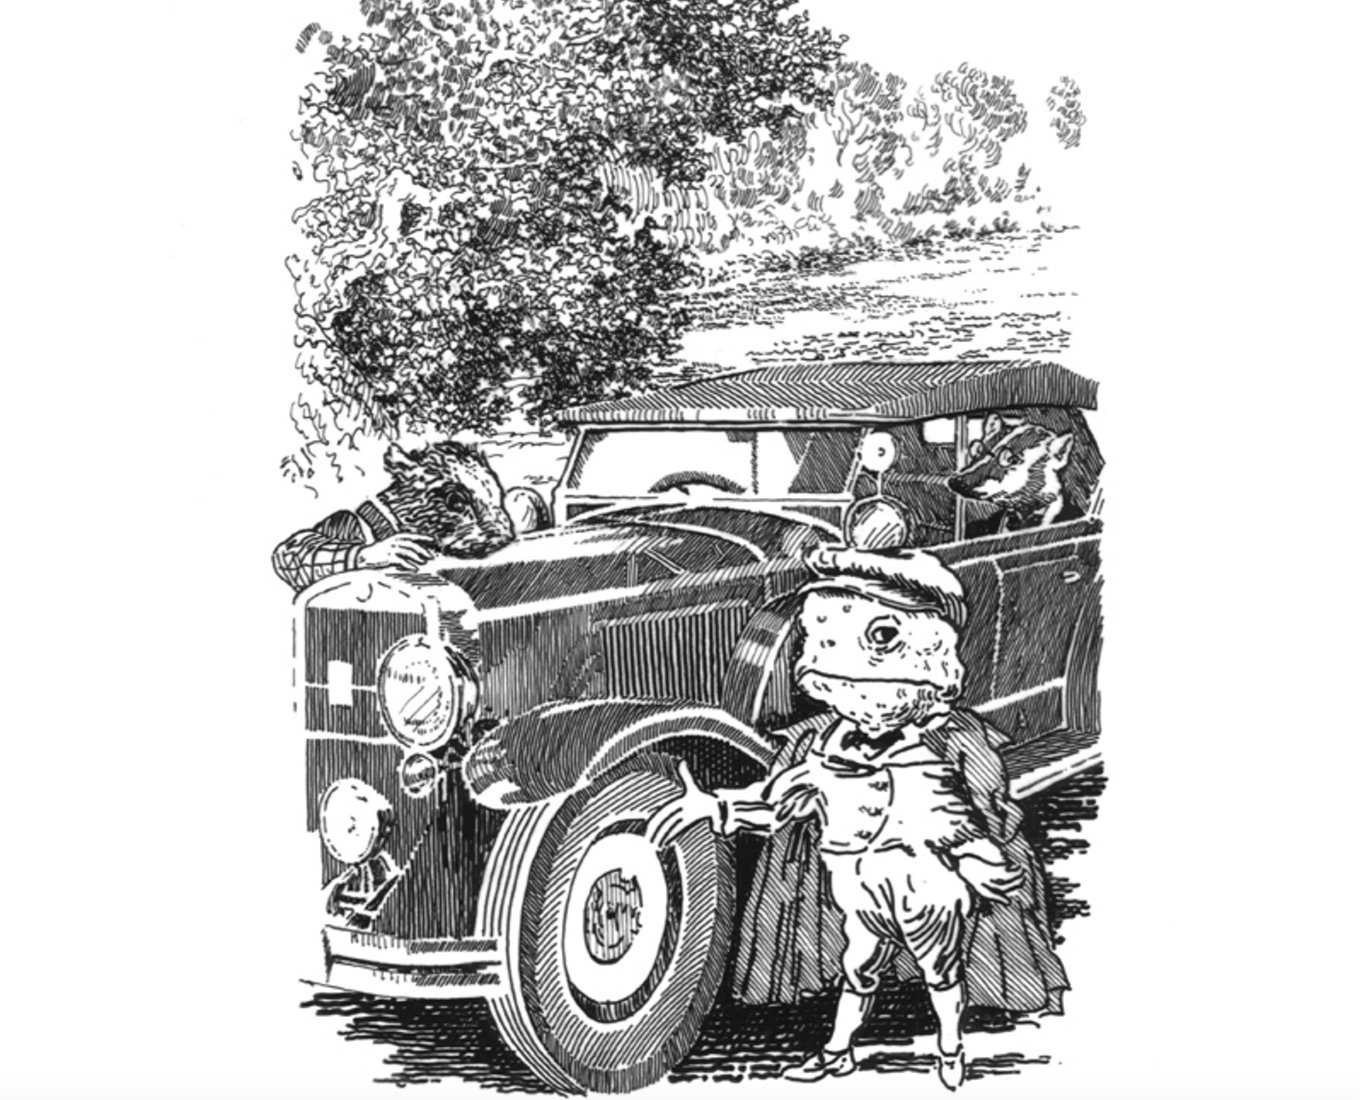 A drawing of a frog in a cape stood upright in front of a vintage car with a badger wearing glasses in the backseat.